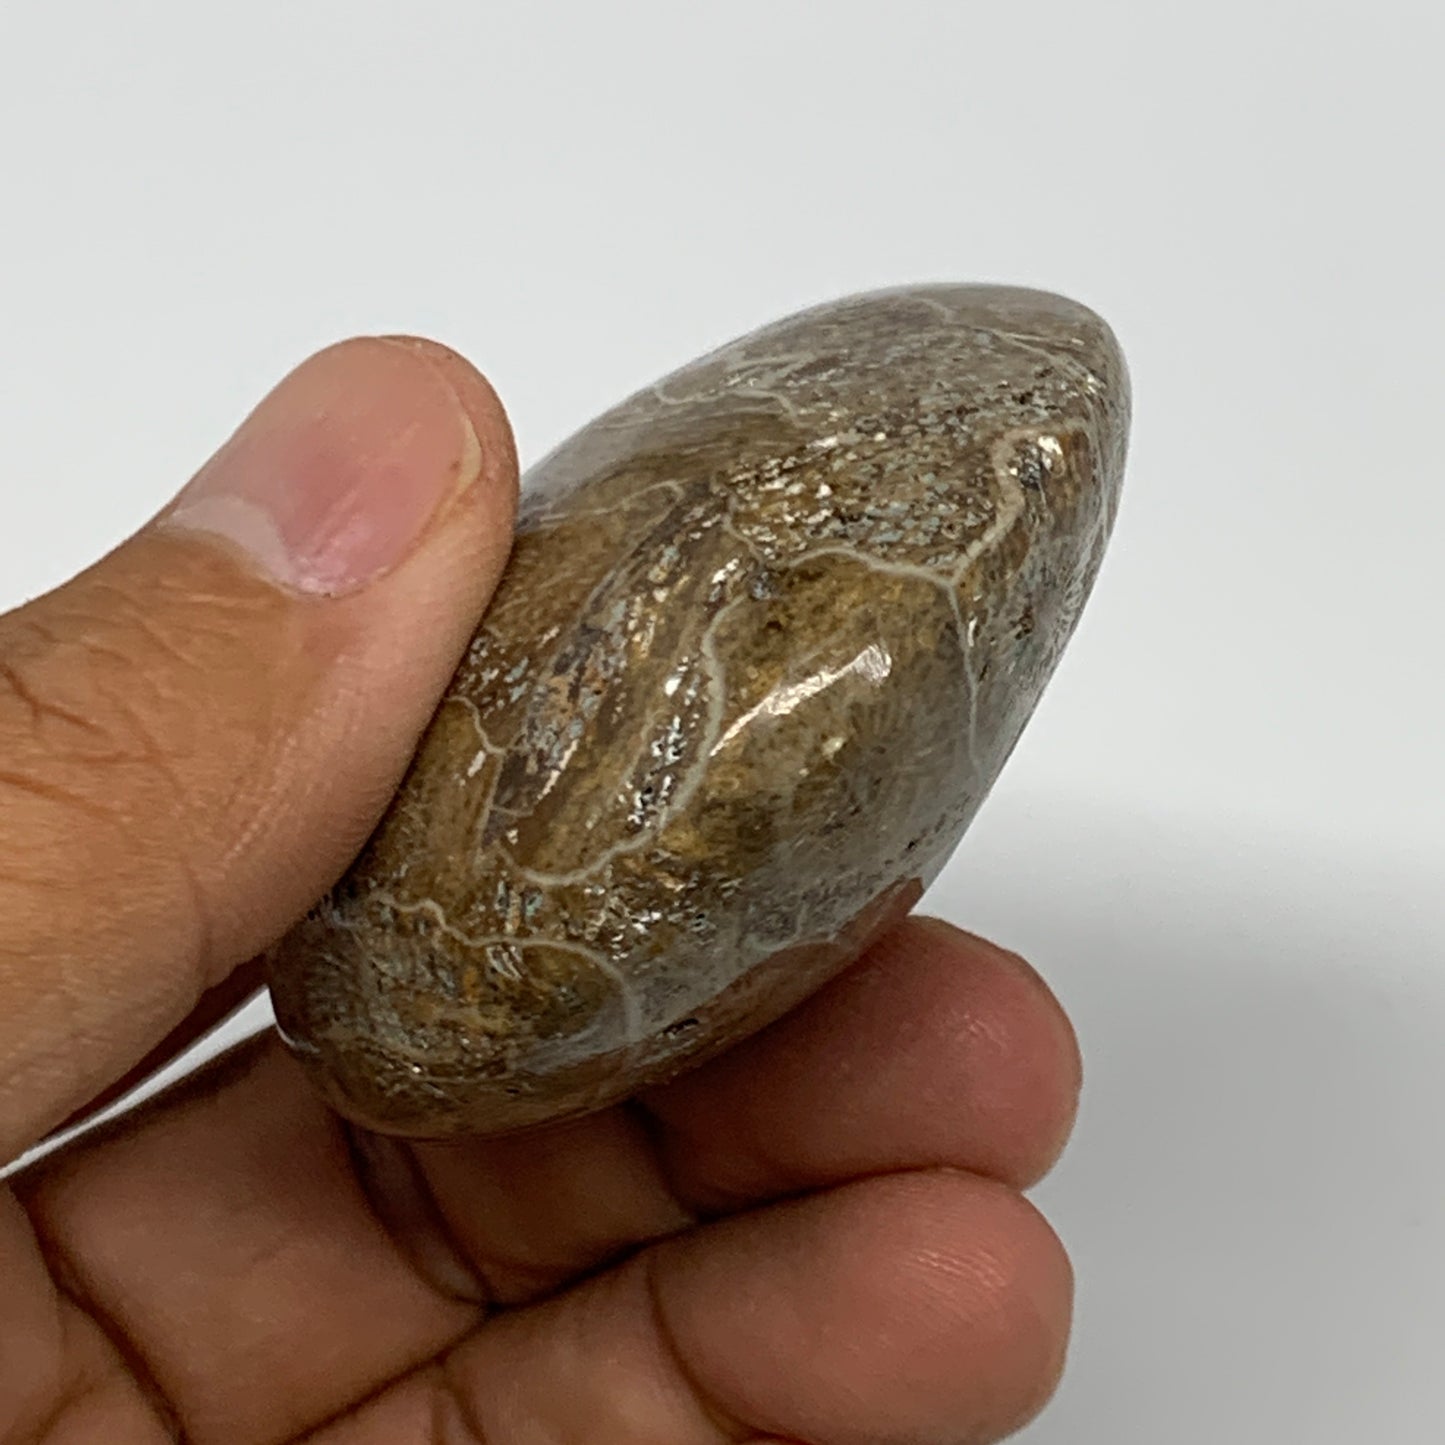 107.8g,2.4"x2.1"x 1.1", Coral Fossils Palm-Stone Polished from Morocco, B20389